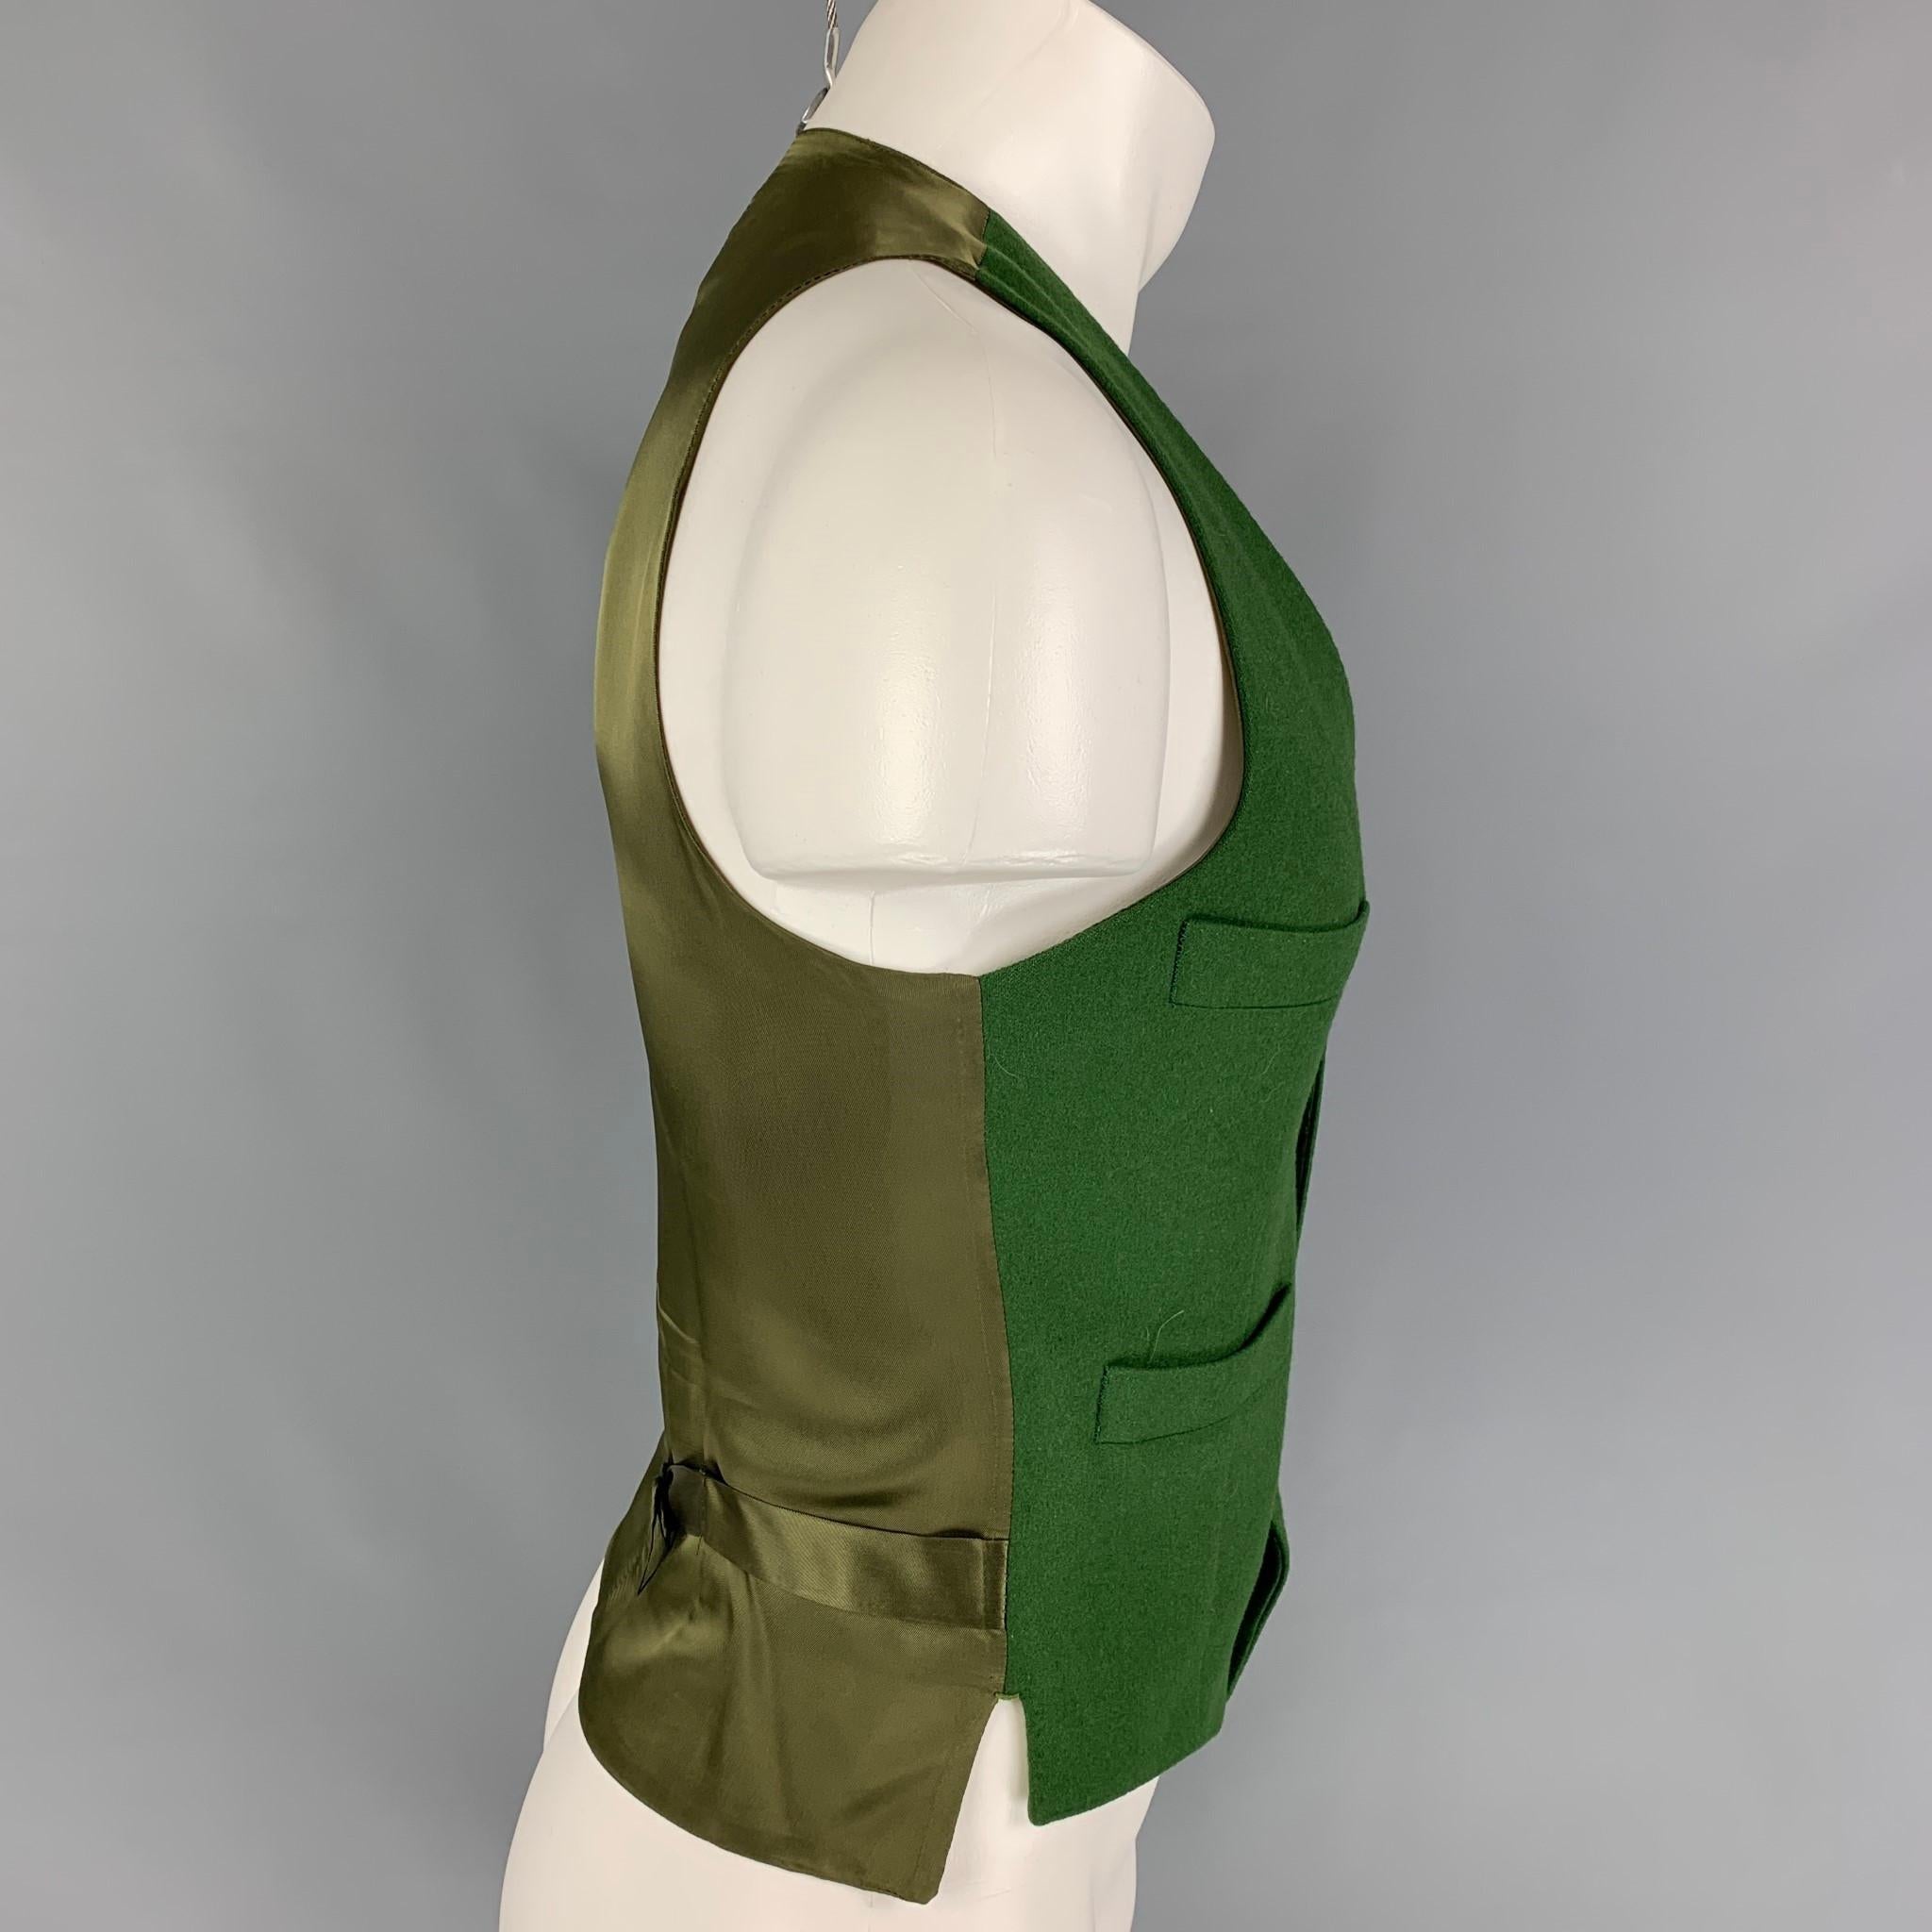 BENJAMIN BIXBY vest comes in a green wool featuring a back belt, slit pockets, and a buttoned closure. Made in Italy. 

Very Good Pre-Owned Condition.
Marked: 36

Measurements:

Shoulder: 11.5 in.
Chest: 36 in.
Length: 22 in. 